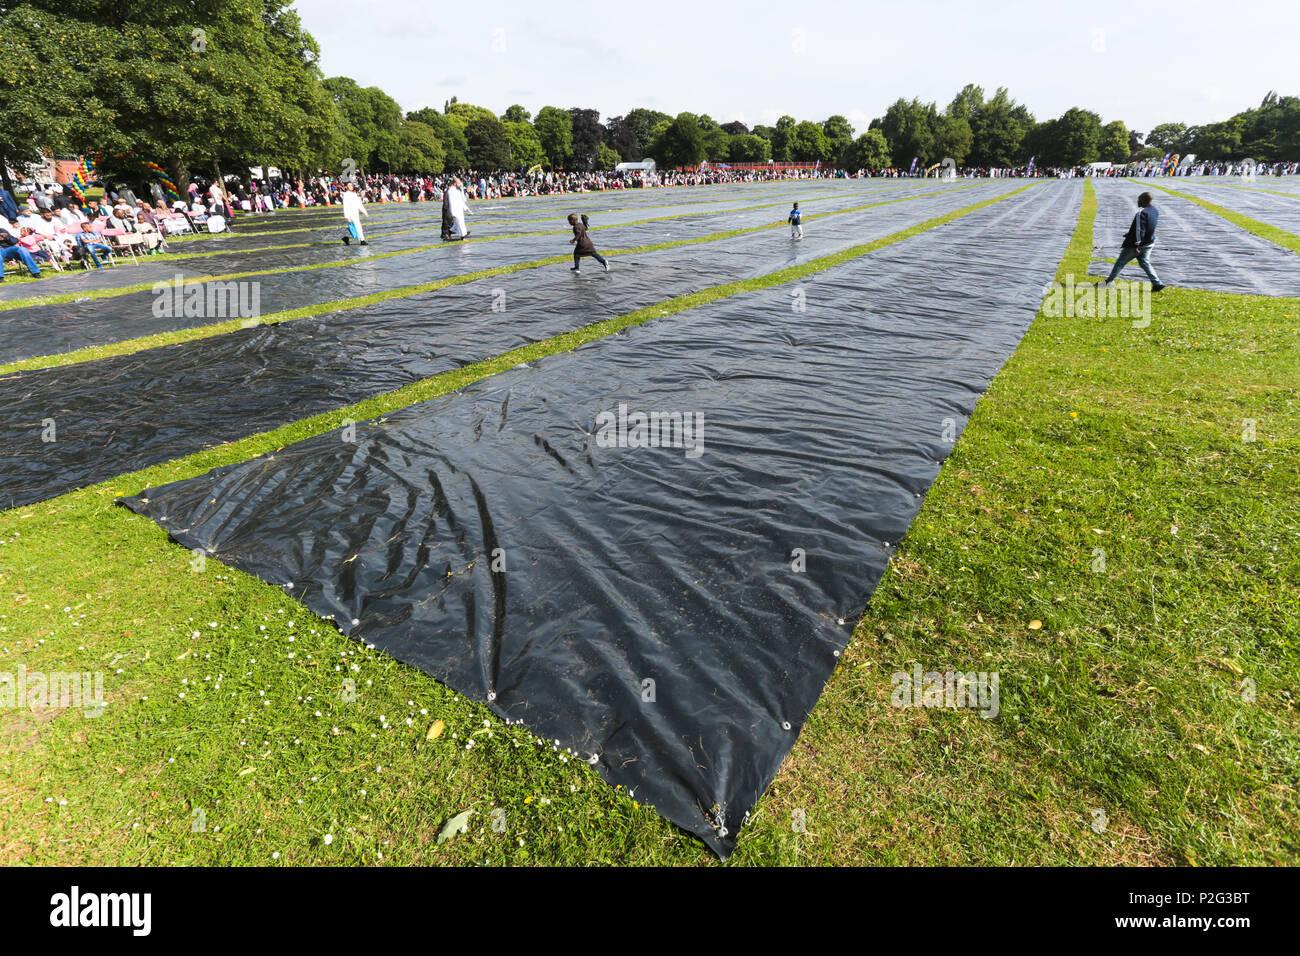 Birmingham, UK. 15th June, 2018. Over 100,000 muslims gather in Small Heath park, Birmingham, to pray on the morning of Eid, the end of the fasting month of Ramadan. Plastic sheeting is laid in place of prayer mats. Peter Lopeman/Alamy Live News Stock Photo